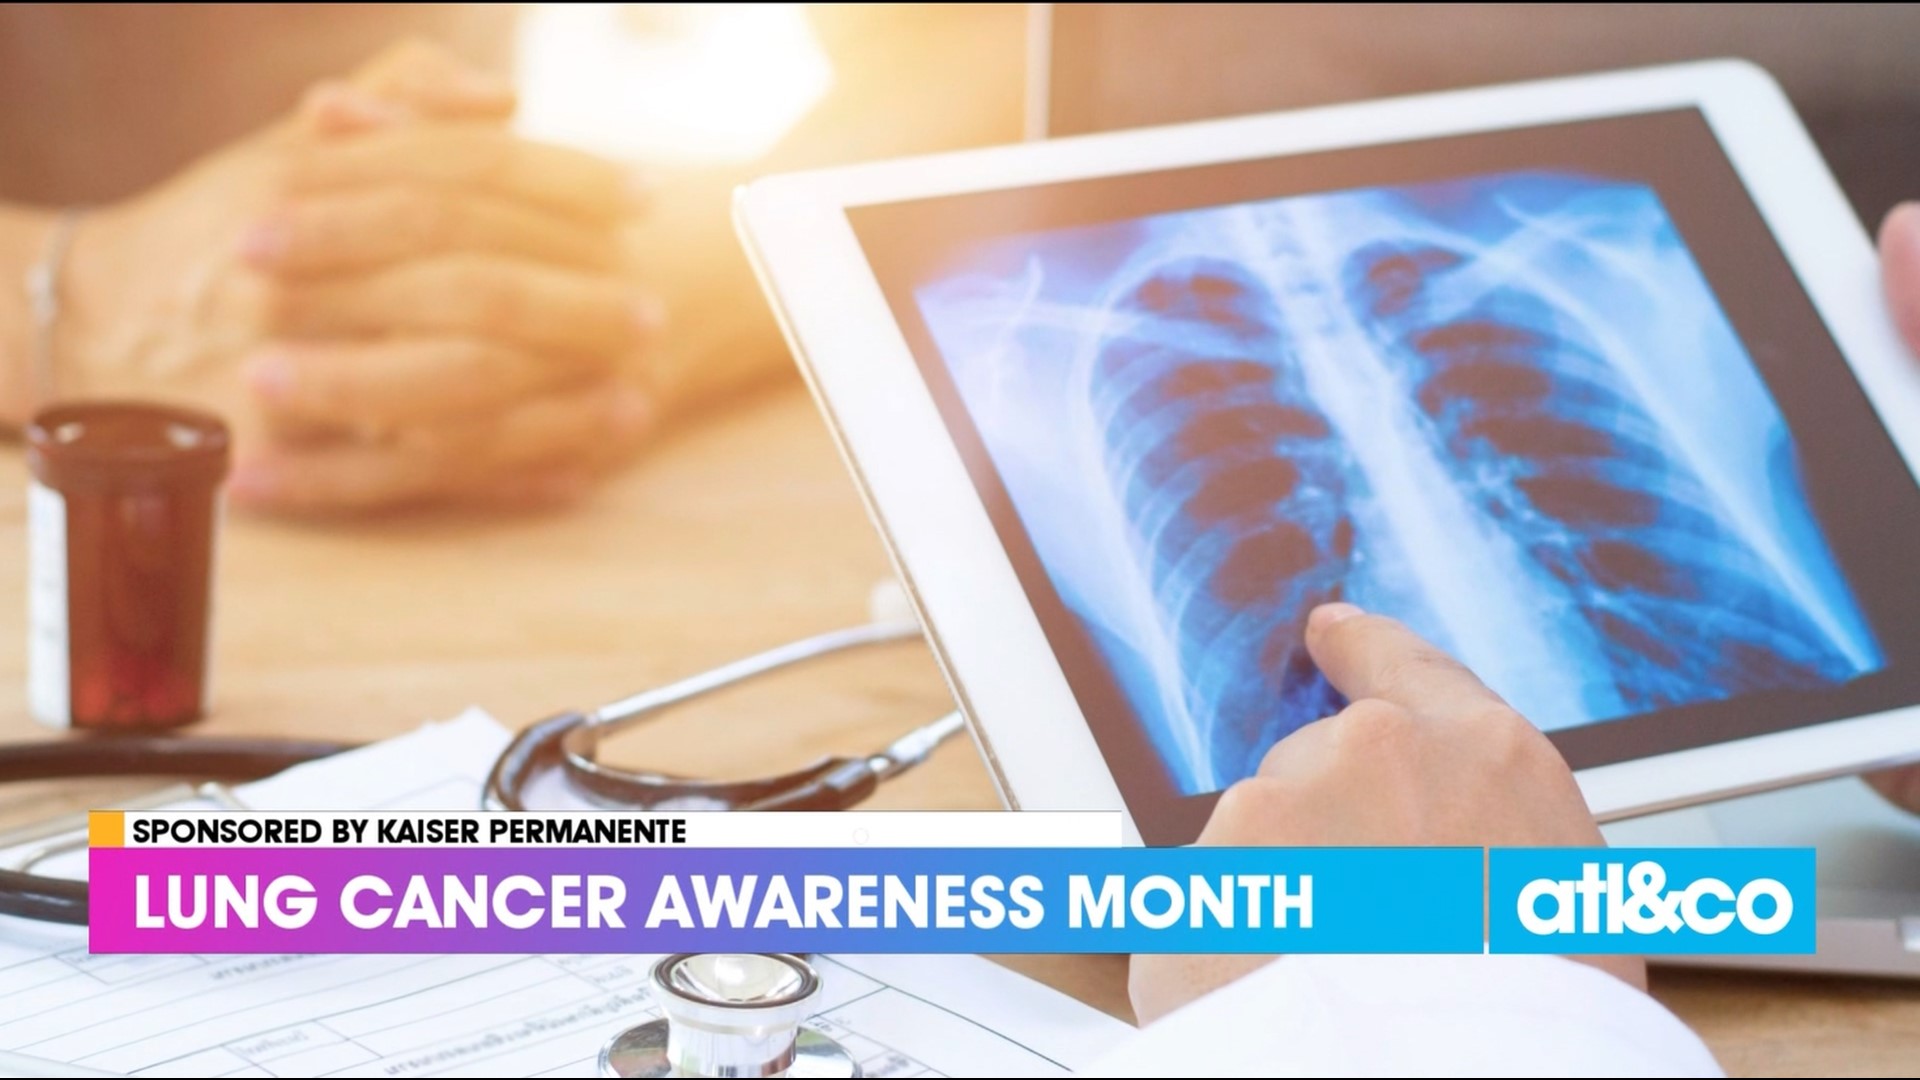 This November, raise awareness of lung cancer. Learn about possible symptoms and risk factors from Kaiser Permanente.